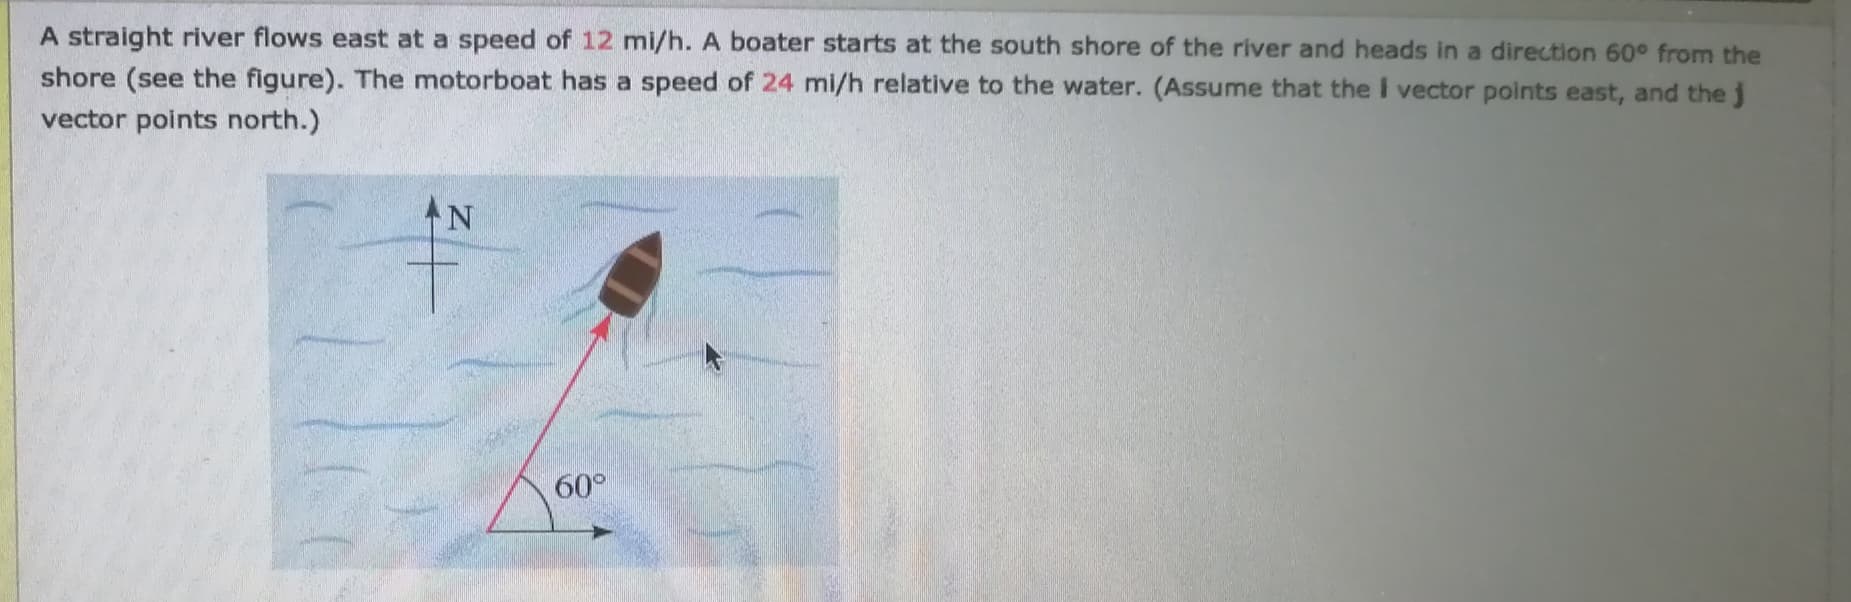 A straight river flows east at a speed of 12 mi/h. A boater starts at the south shore of the river and heads in a direction 60° from the
shore (see the figure). The motorboat has a speed of 24 mi/h relative to the water. (Assume that the I vector points east, and the j
vector points north.)
AN
60°
